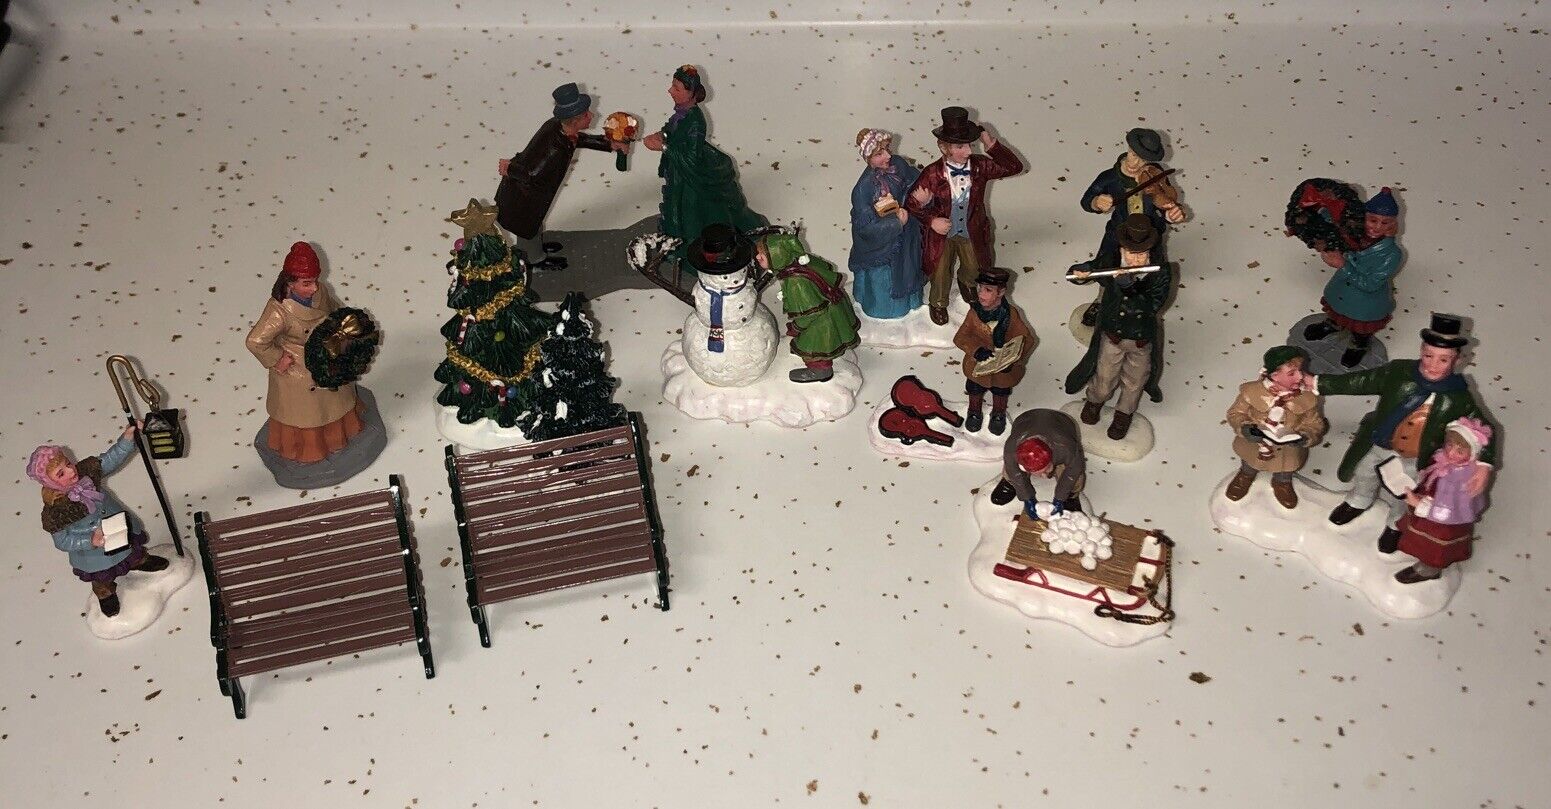 Lot of 15 Lemax Christmas Village Figurines / Benches